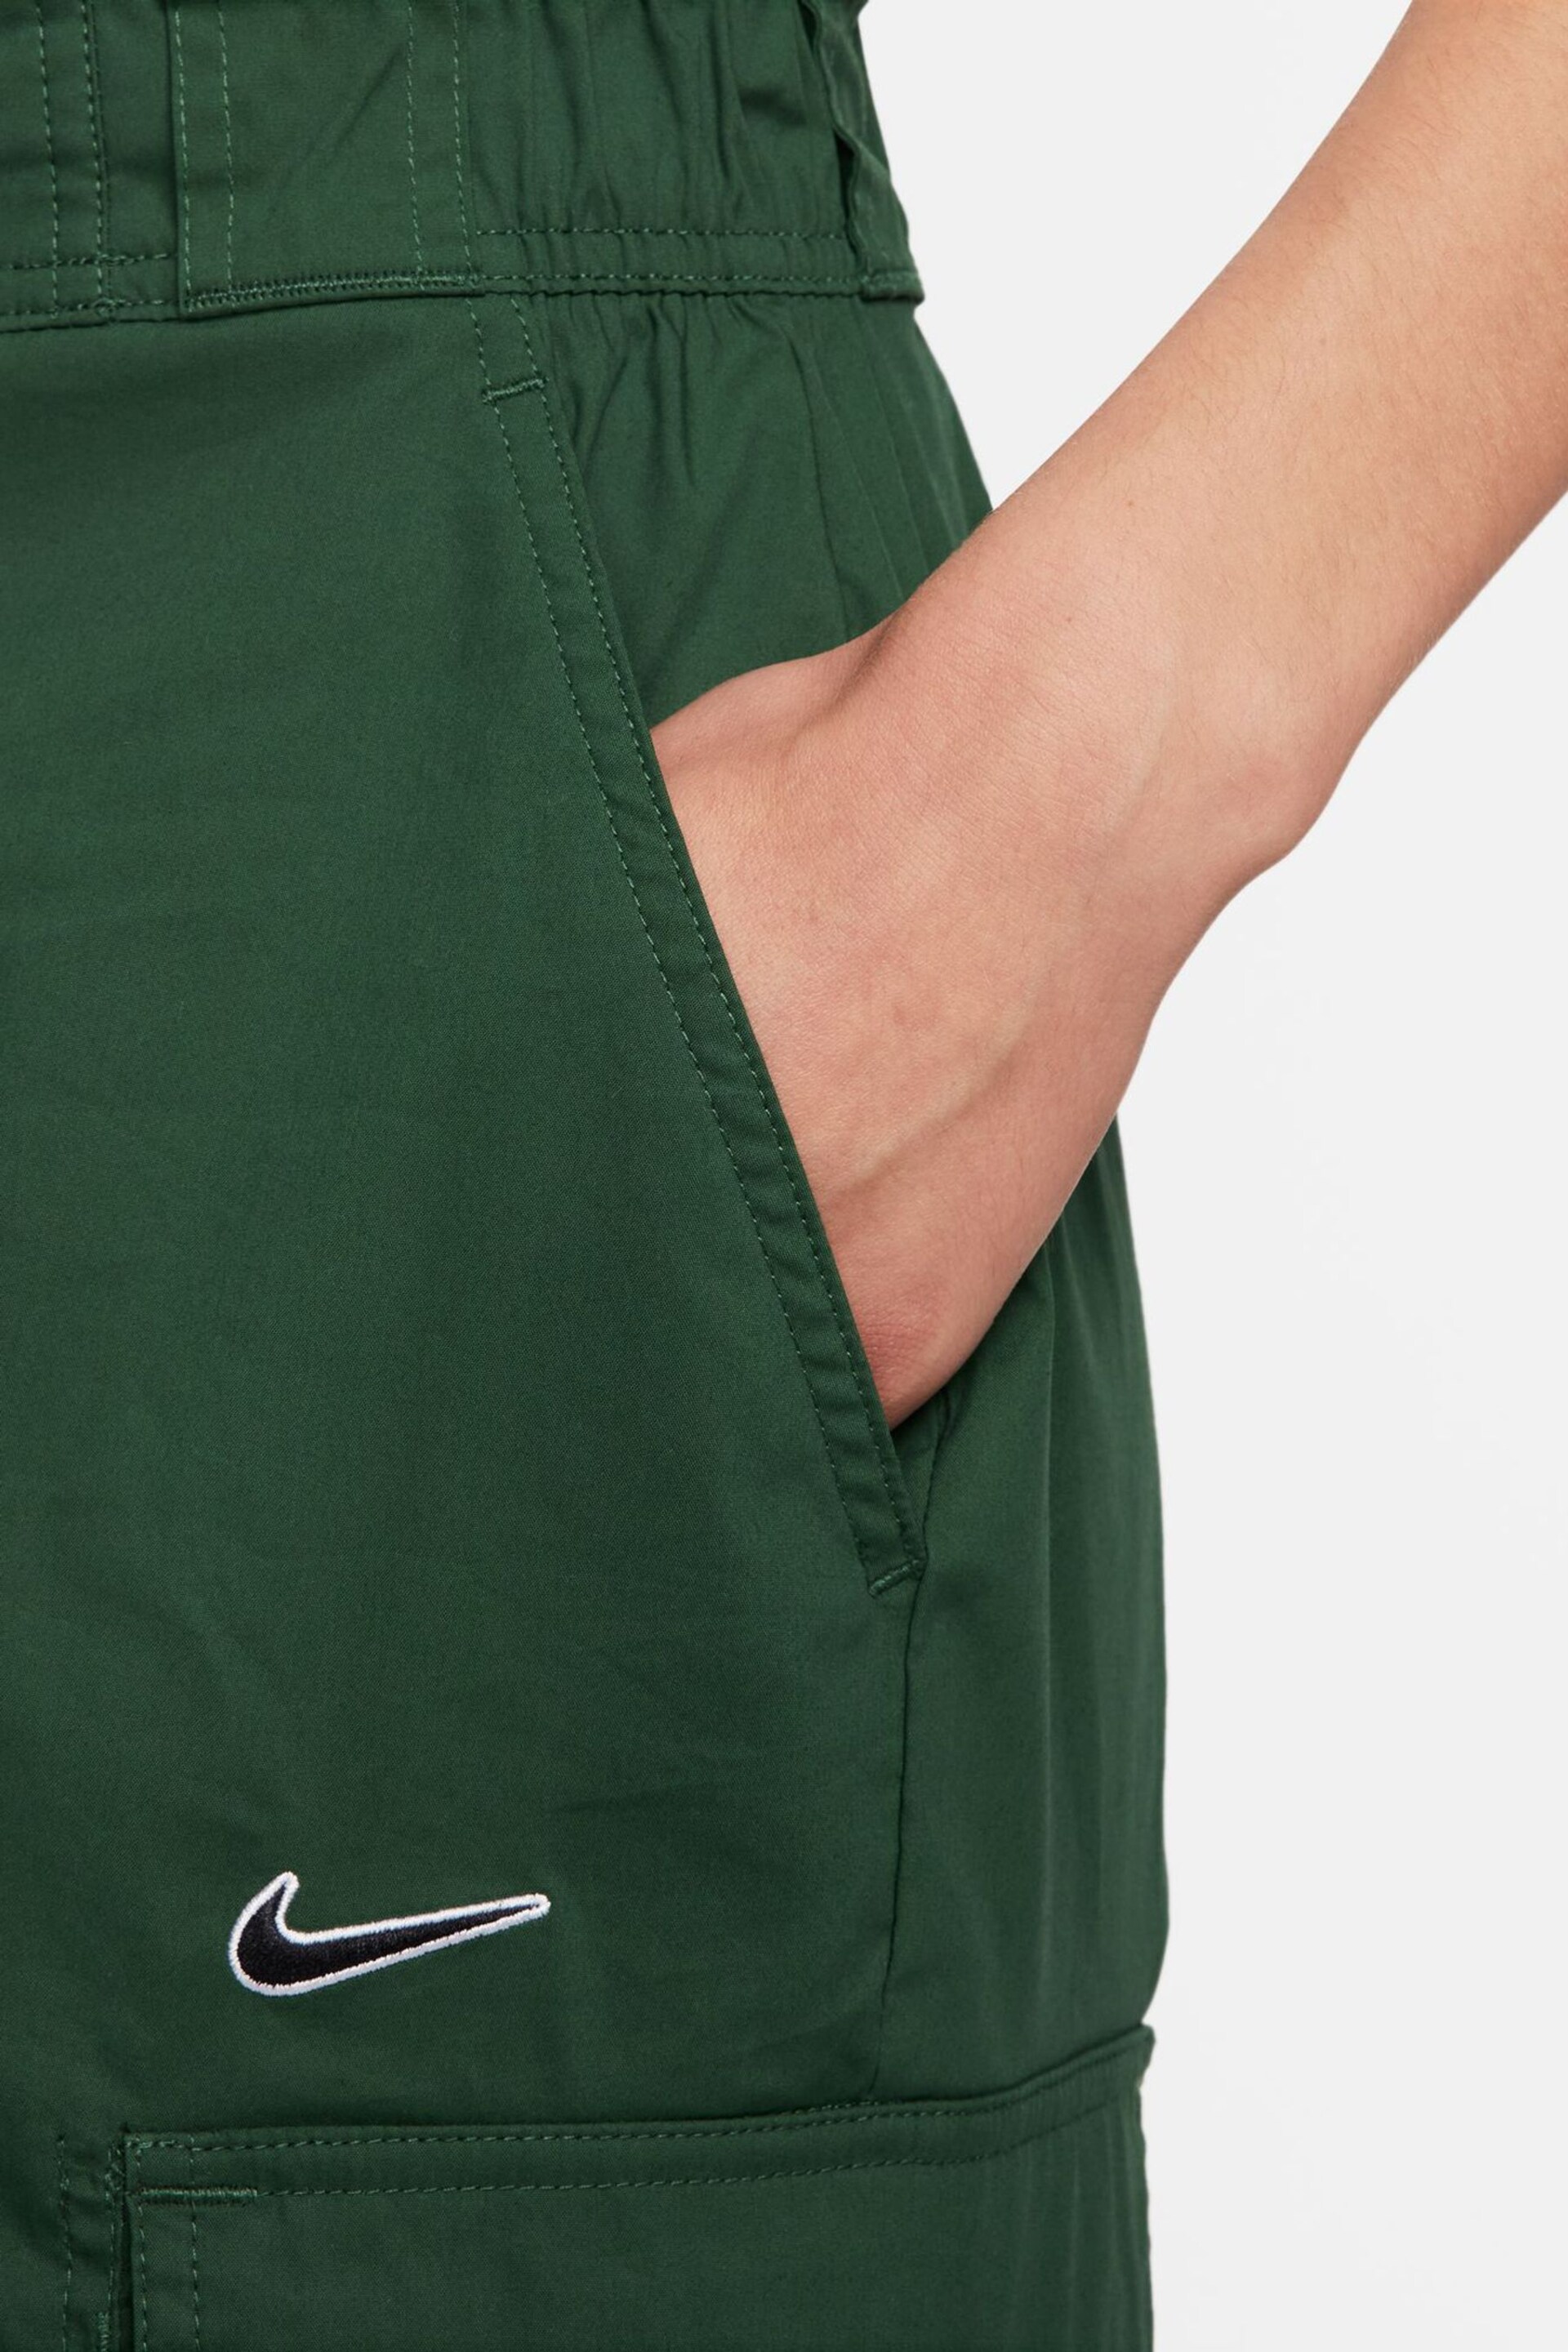 Nike Green High Rise Woven Oversized Trousers - Image 4 of 6